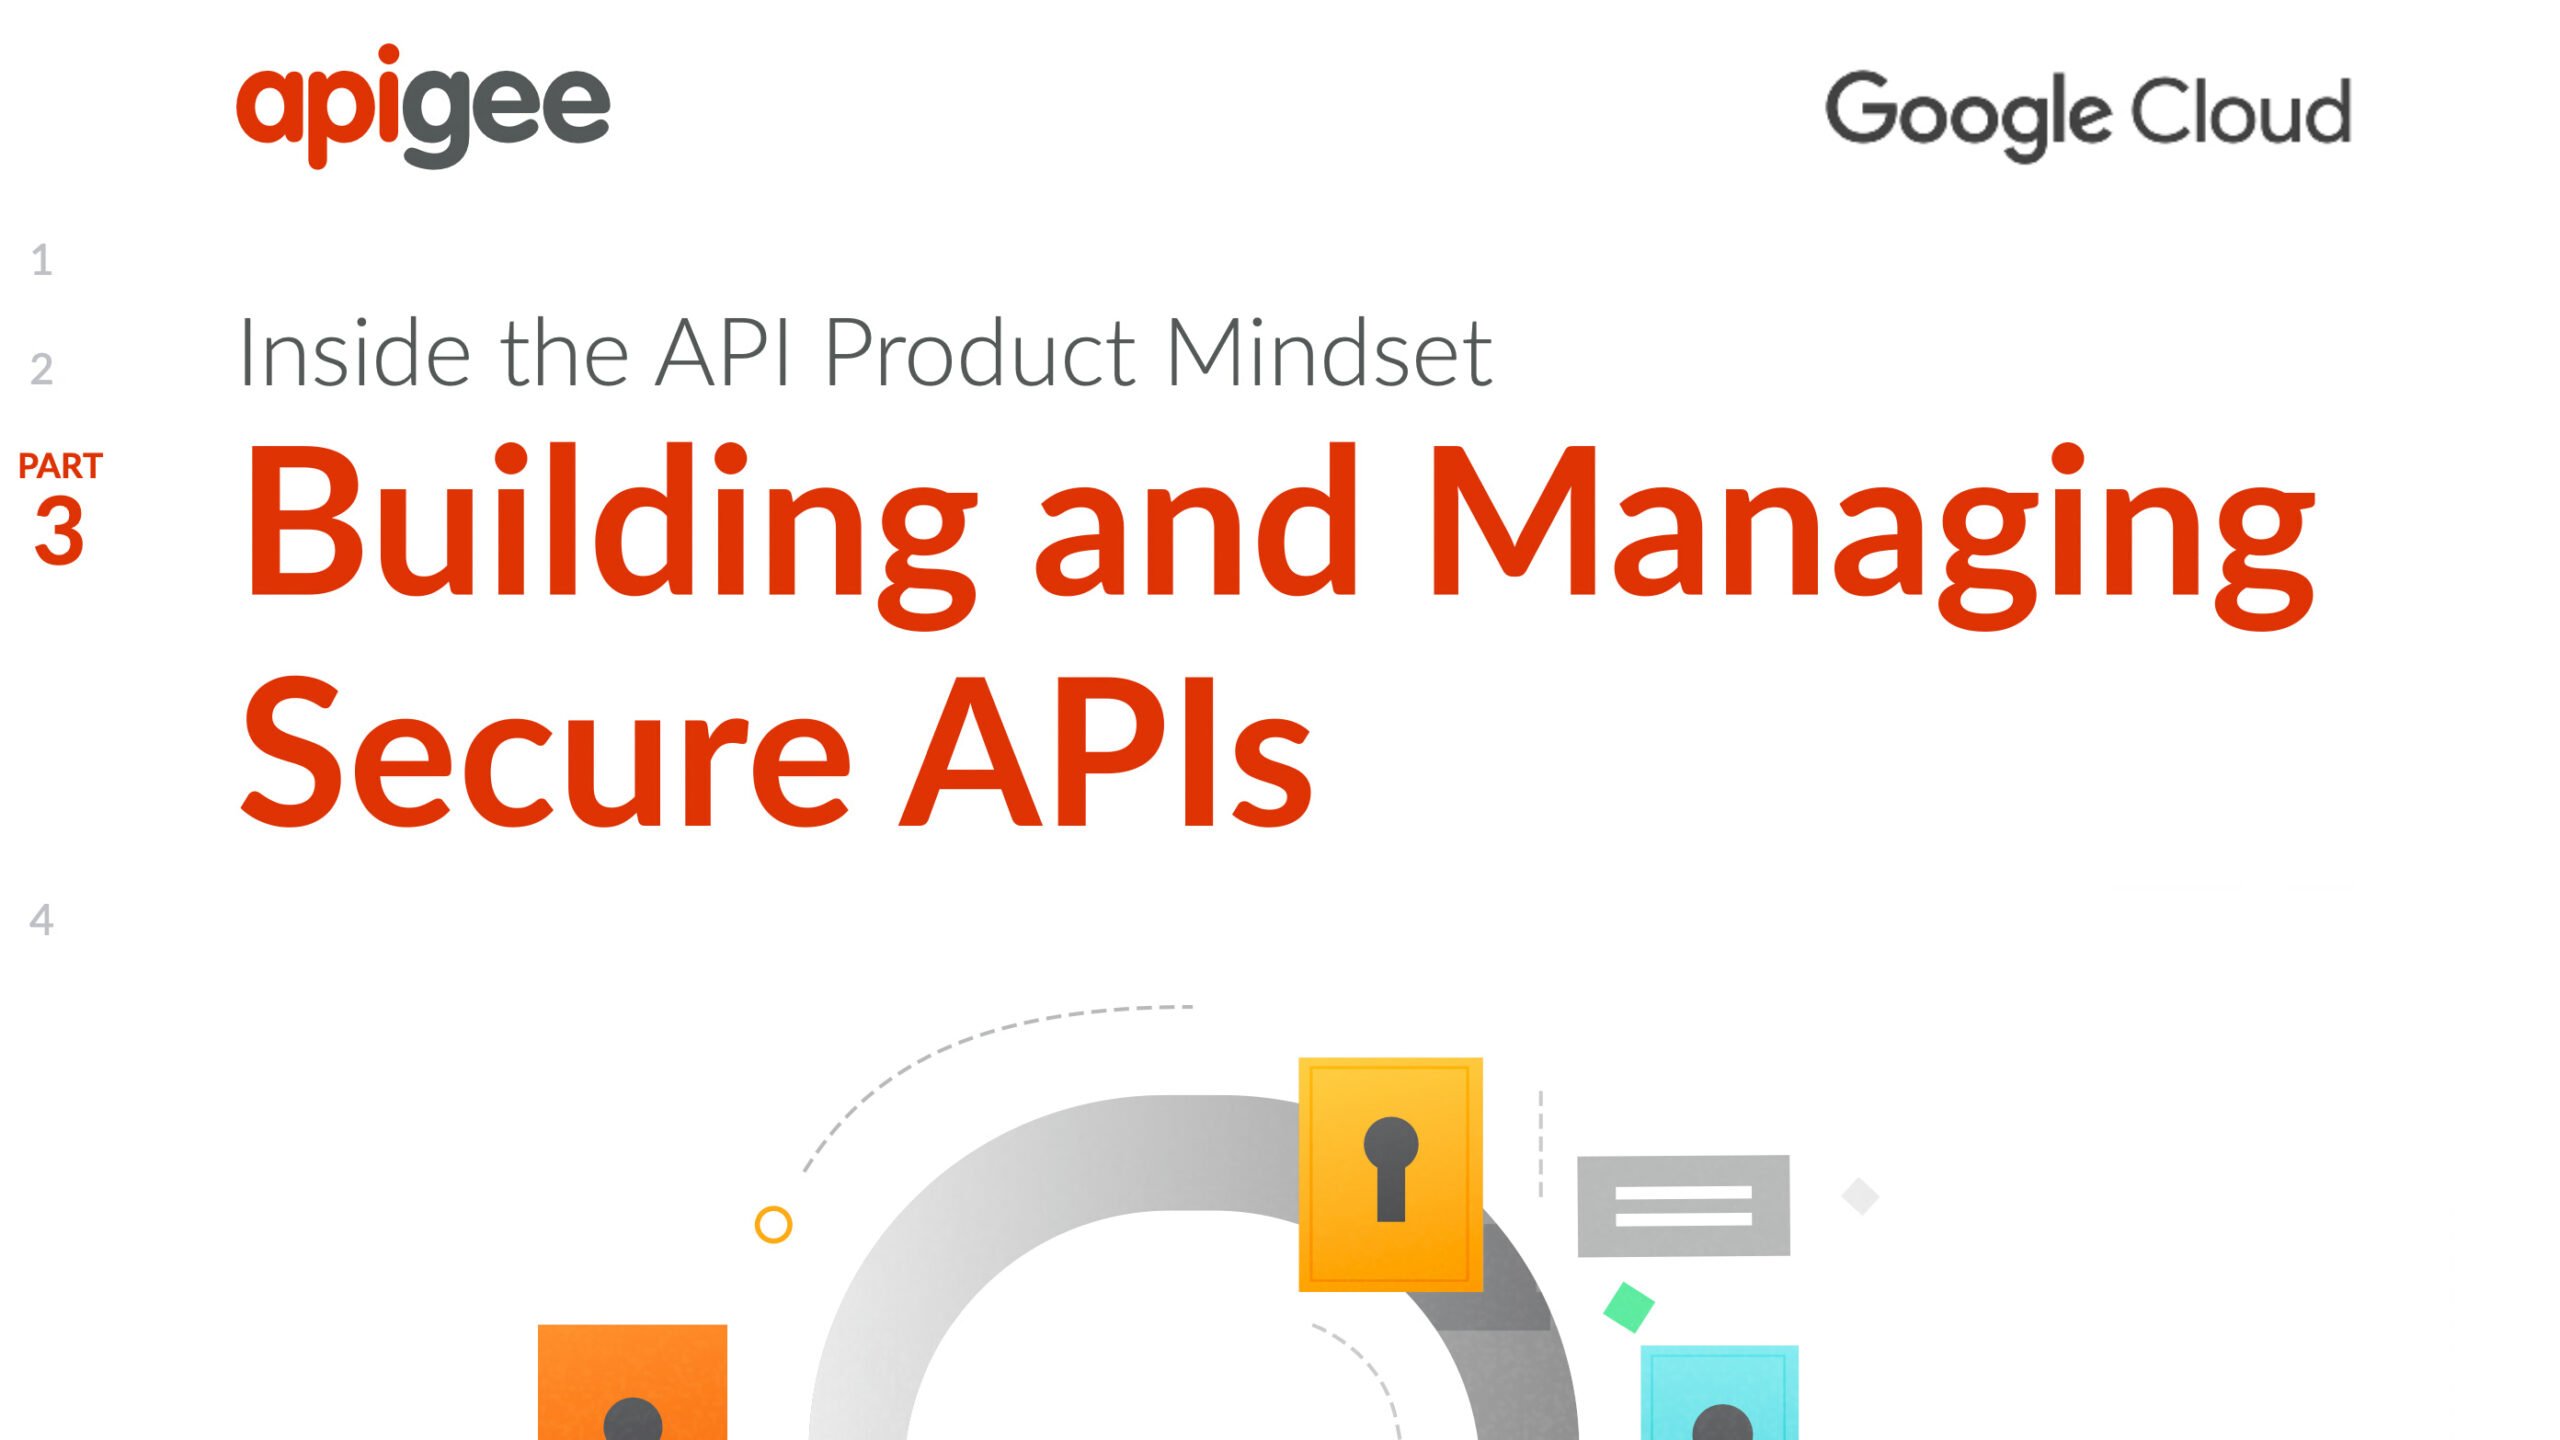 3. Building and Managing Secure APIs